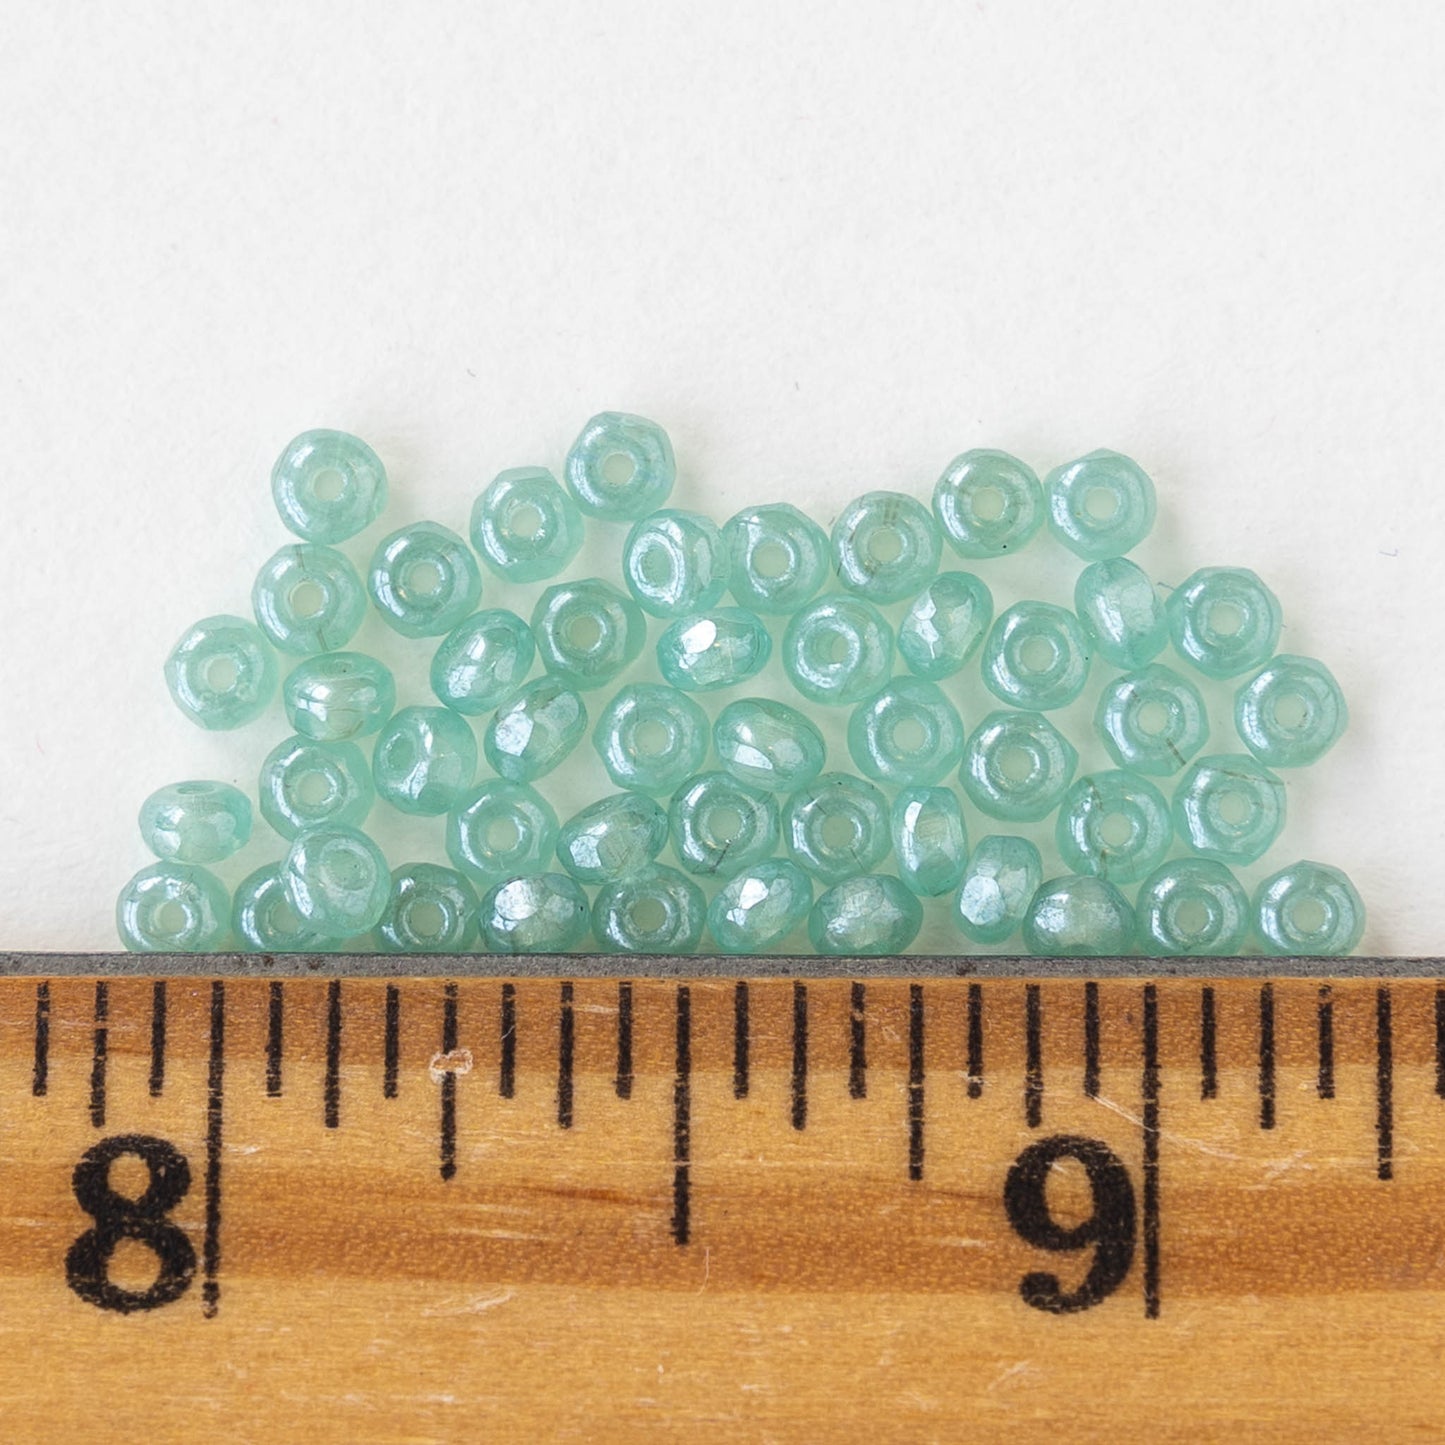 2x3mm Rondelle Beads - Seafoam Luster - 50 Beads